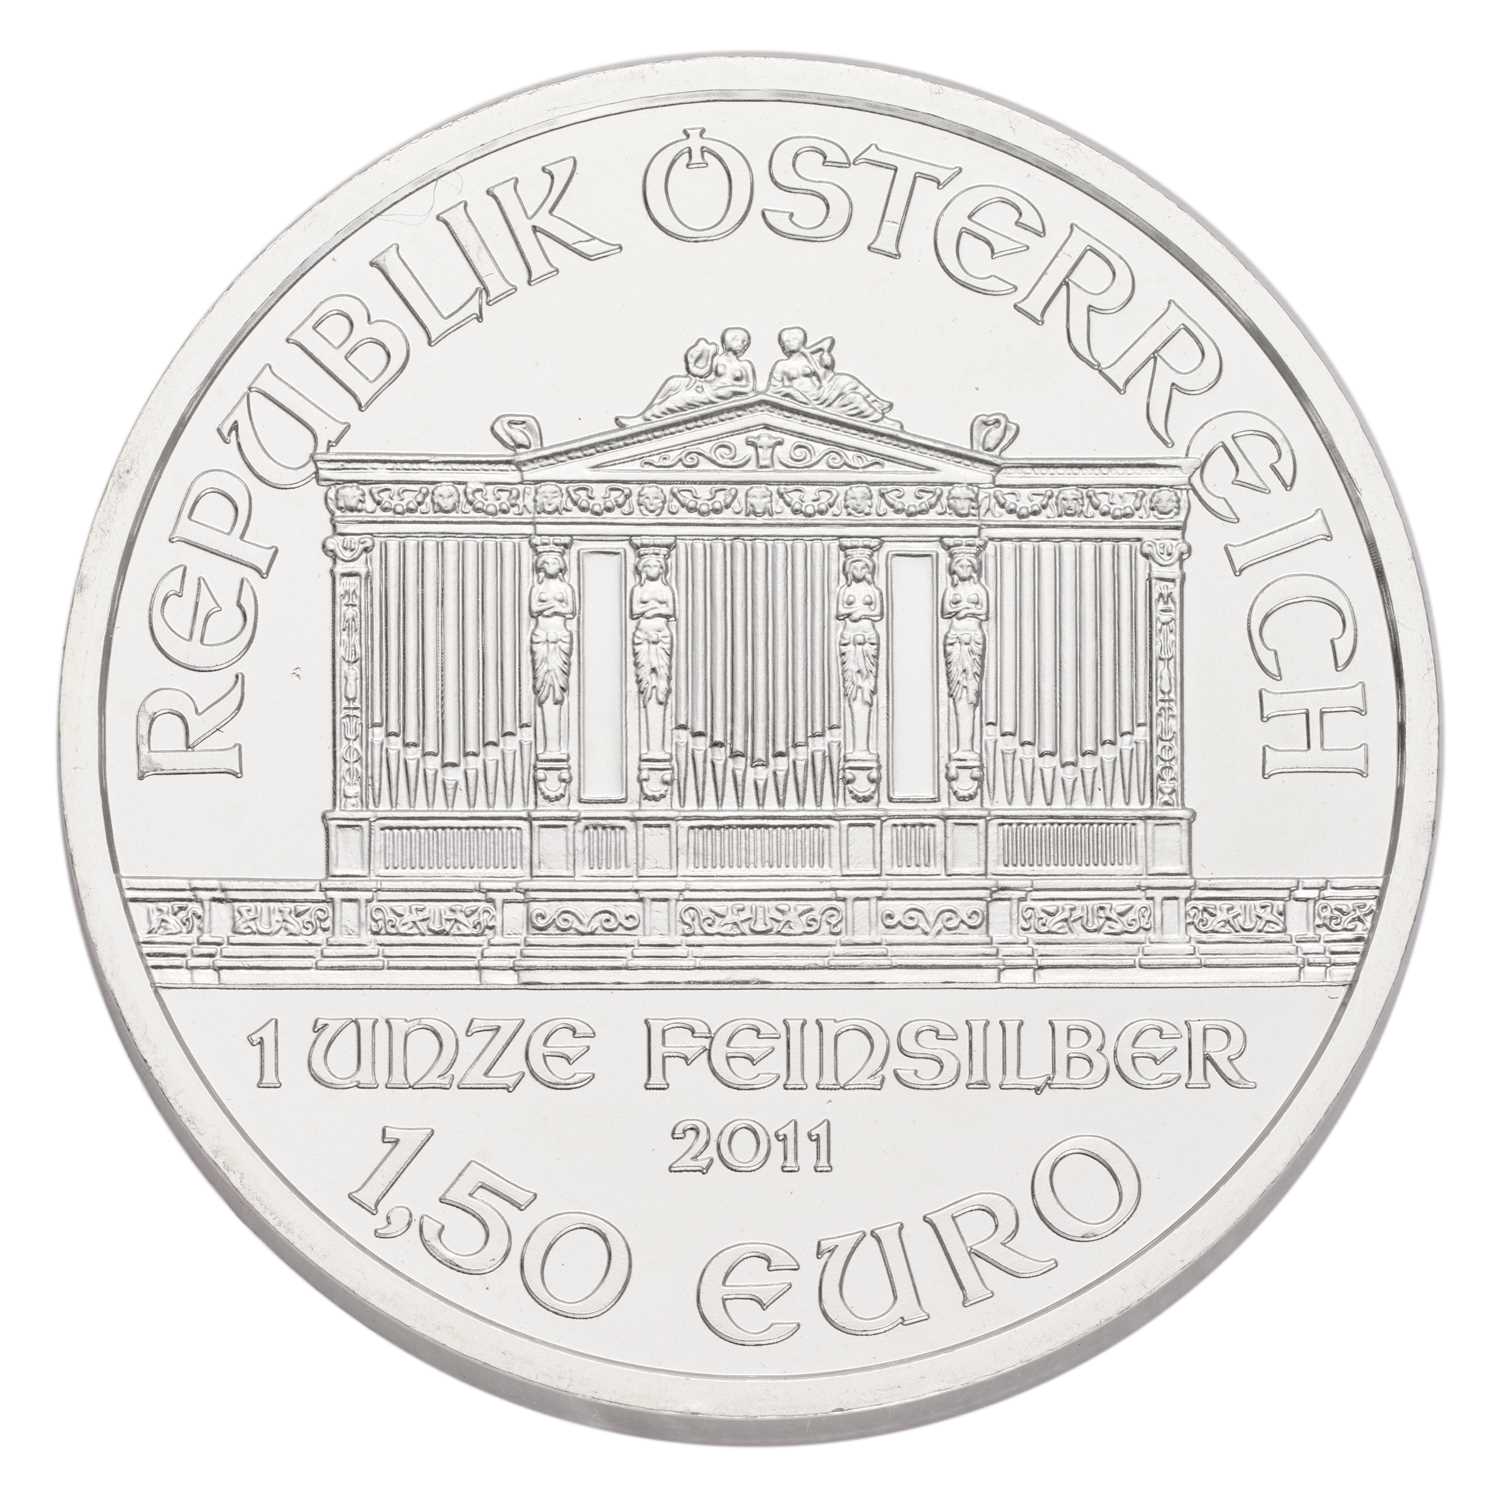 20x Austria 1oz Fine Silver Coins 2011; Vienna Philharmonic design, €1.50 face value; housed in - Image 2 of 3